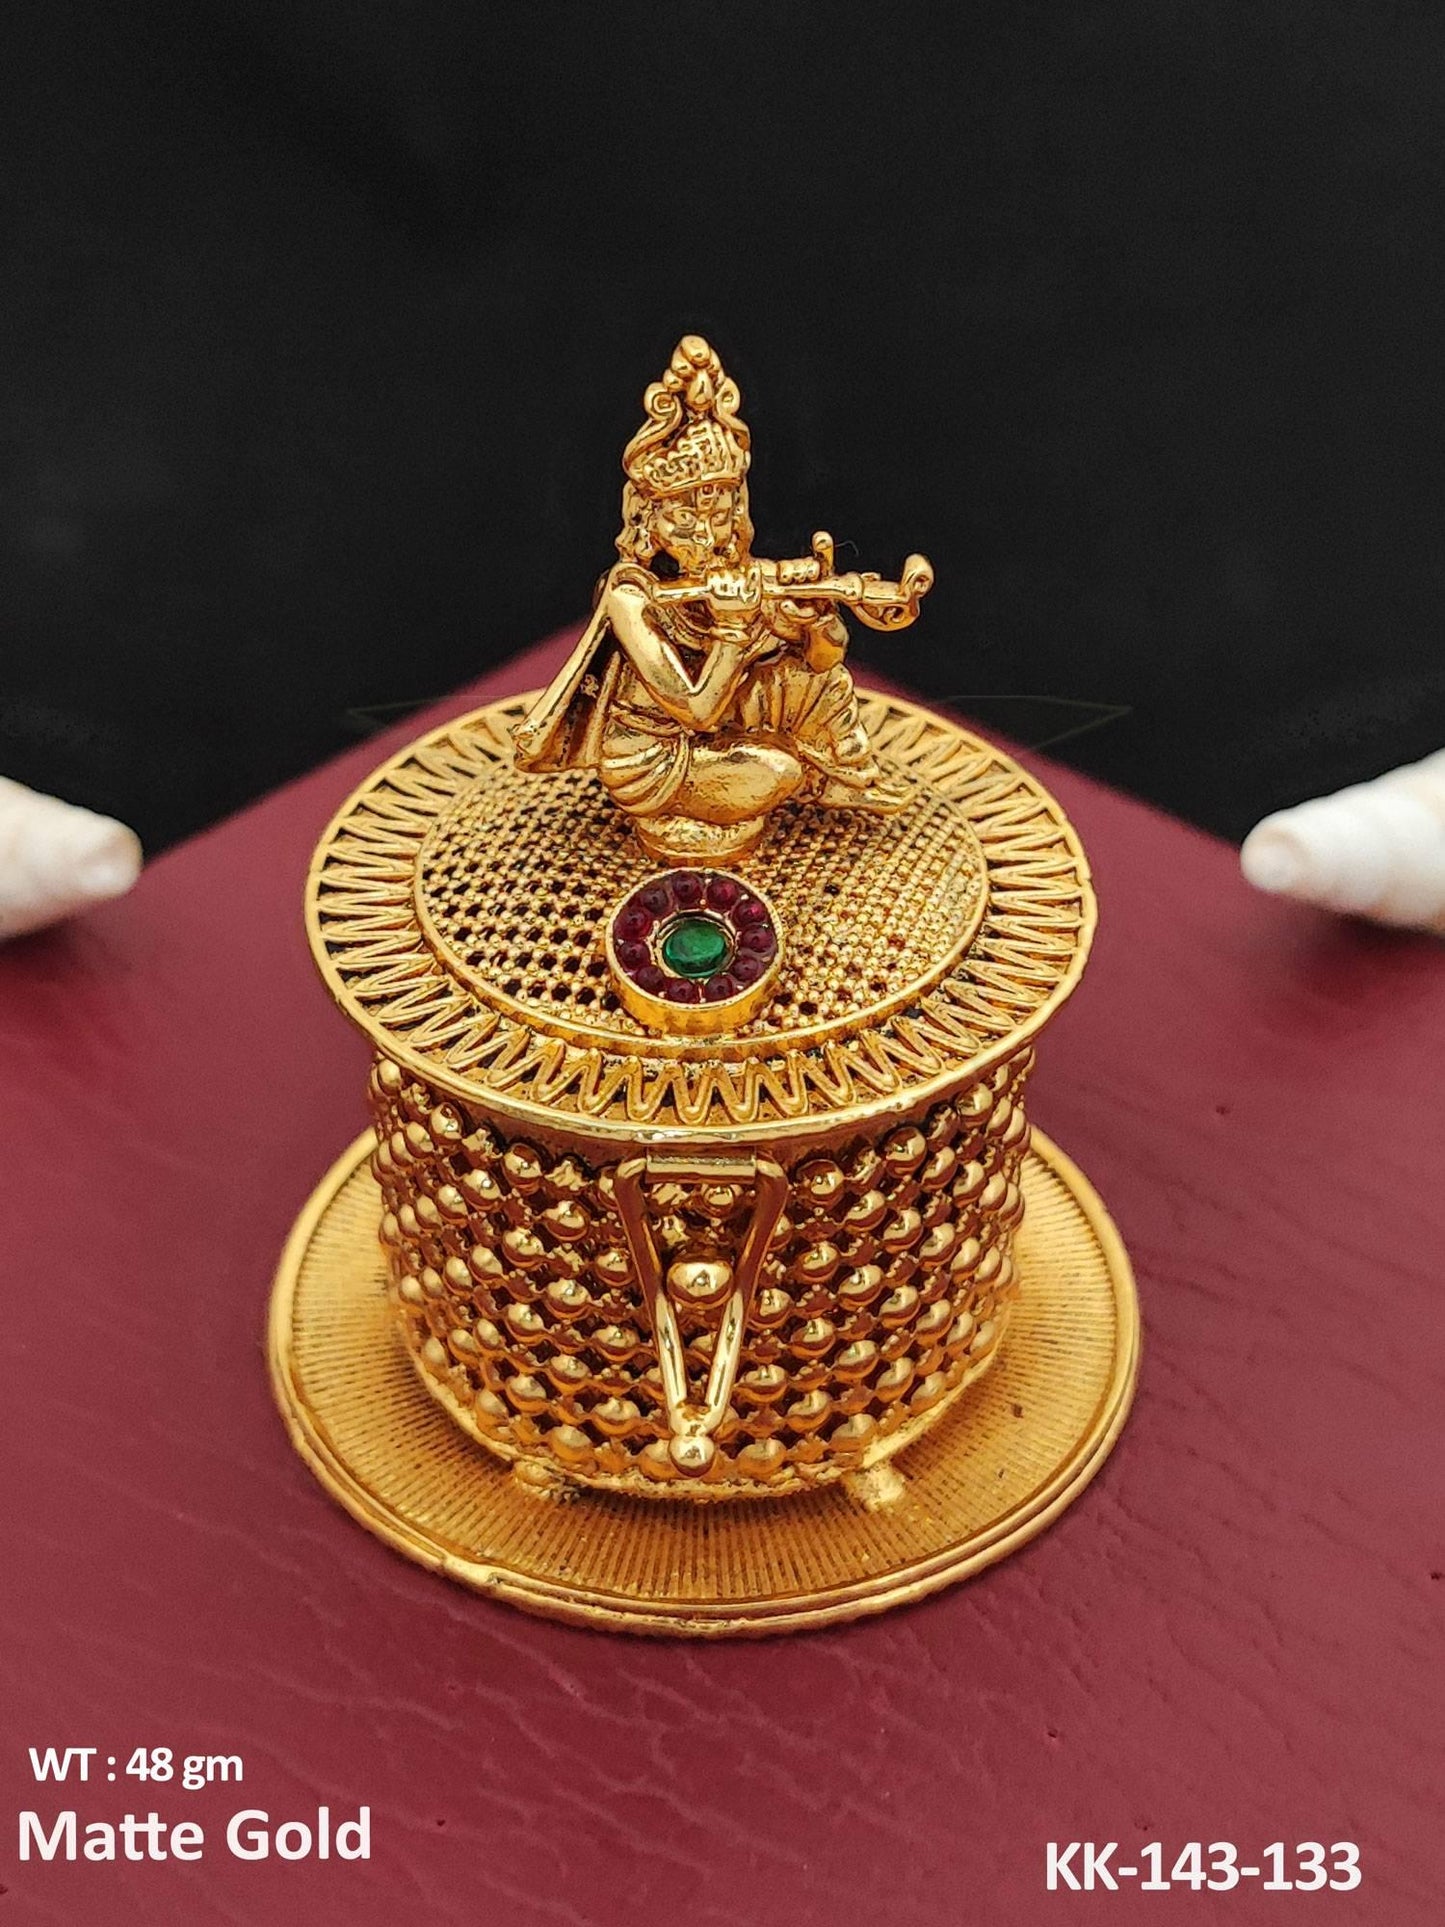 Bring a touch of divinity to your daily routine with our God Krishna Design Matte Gold Polish Temple Kumkum Sindoor Box